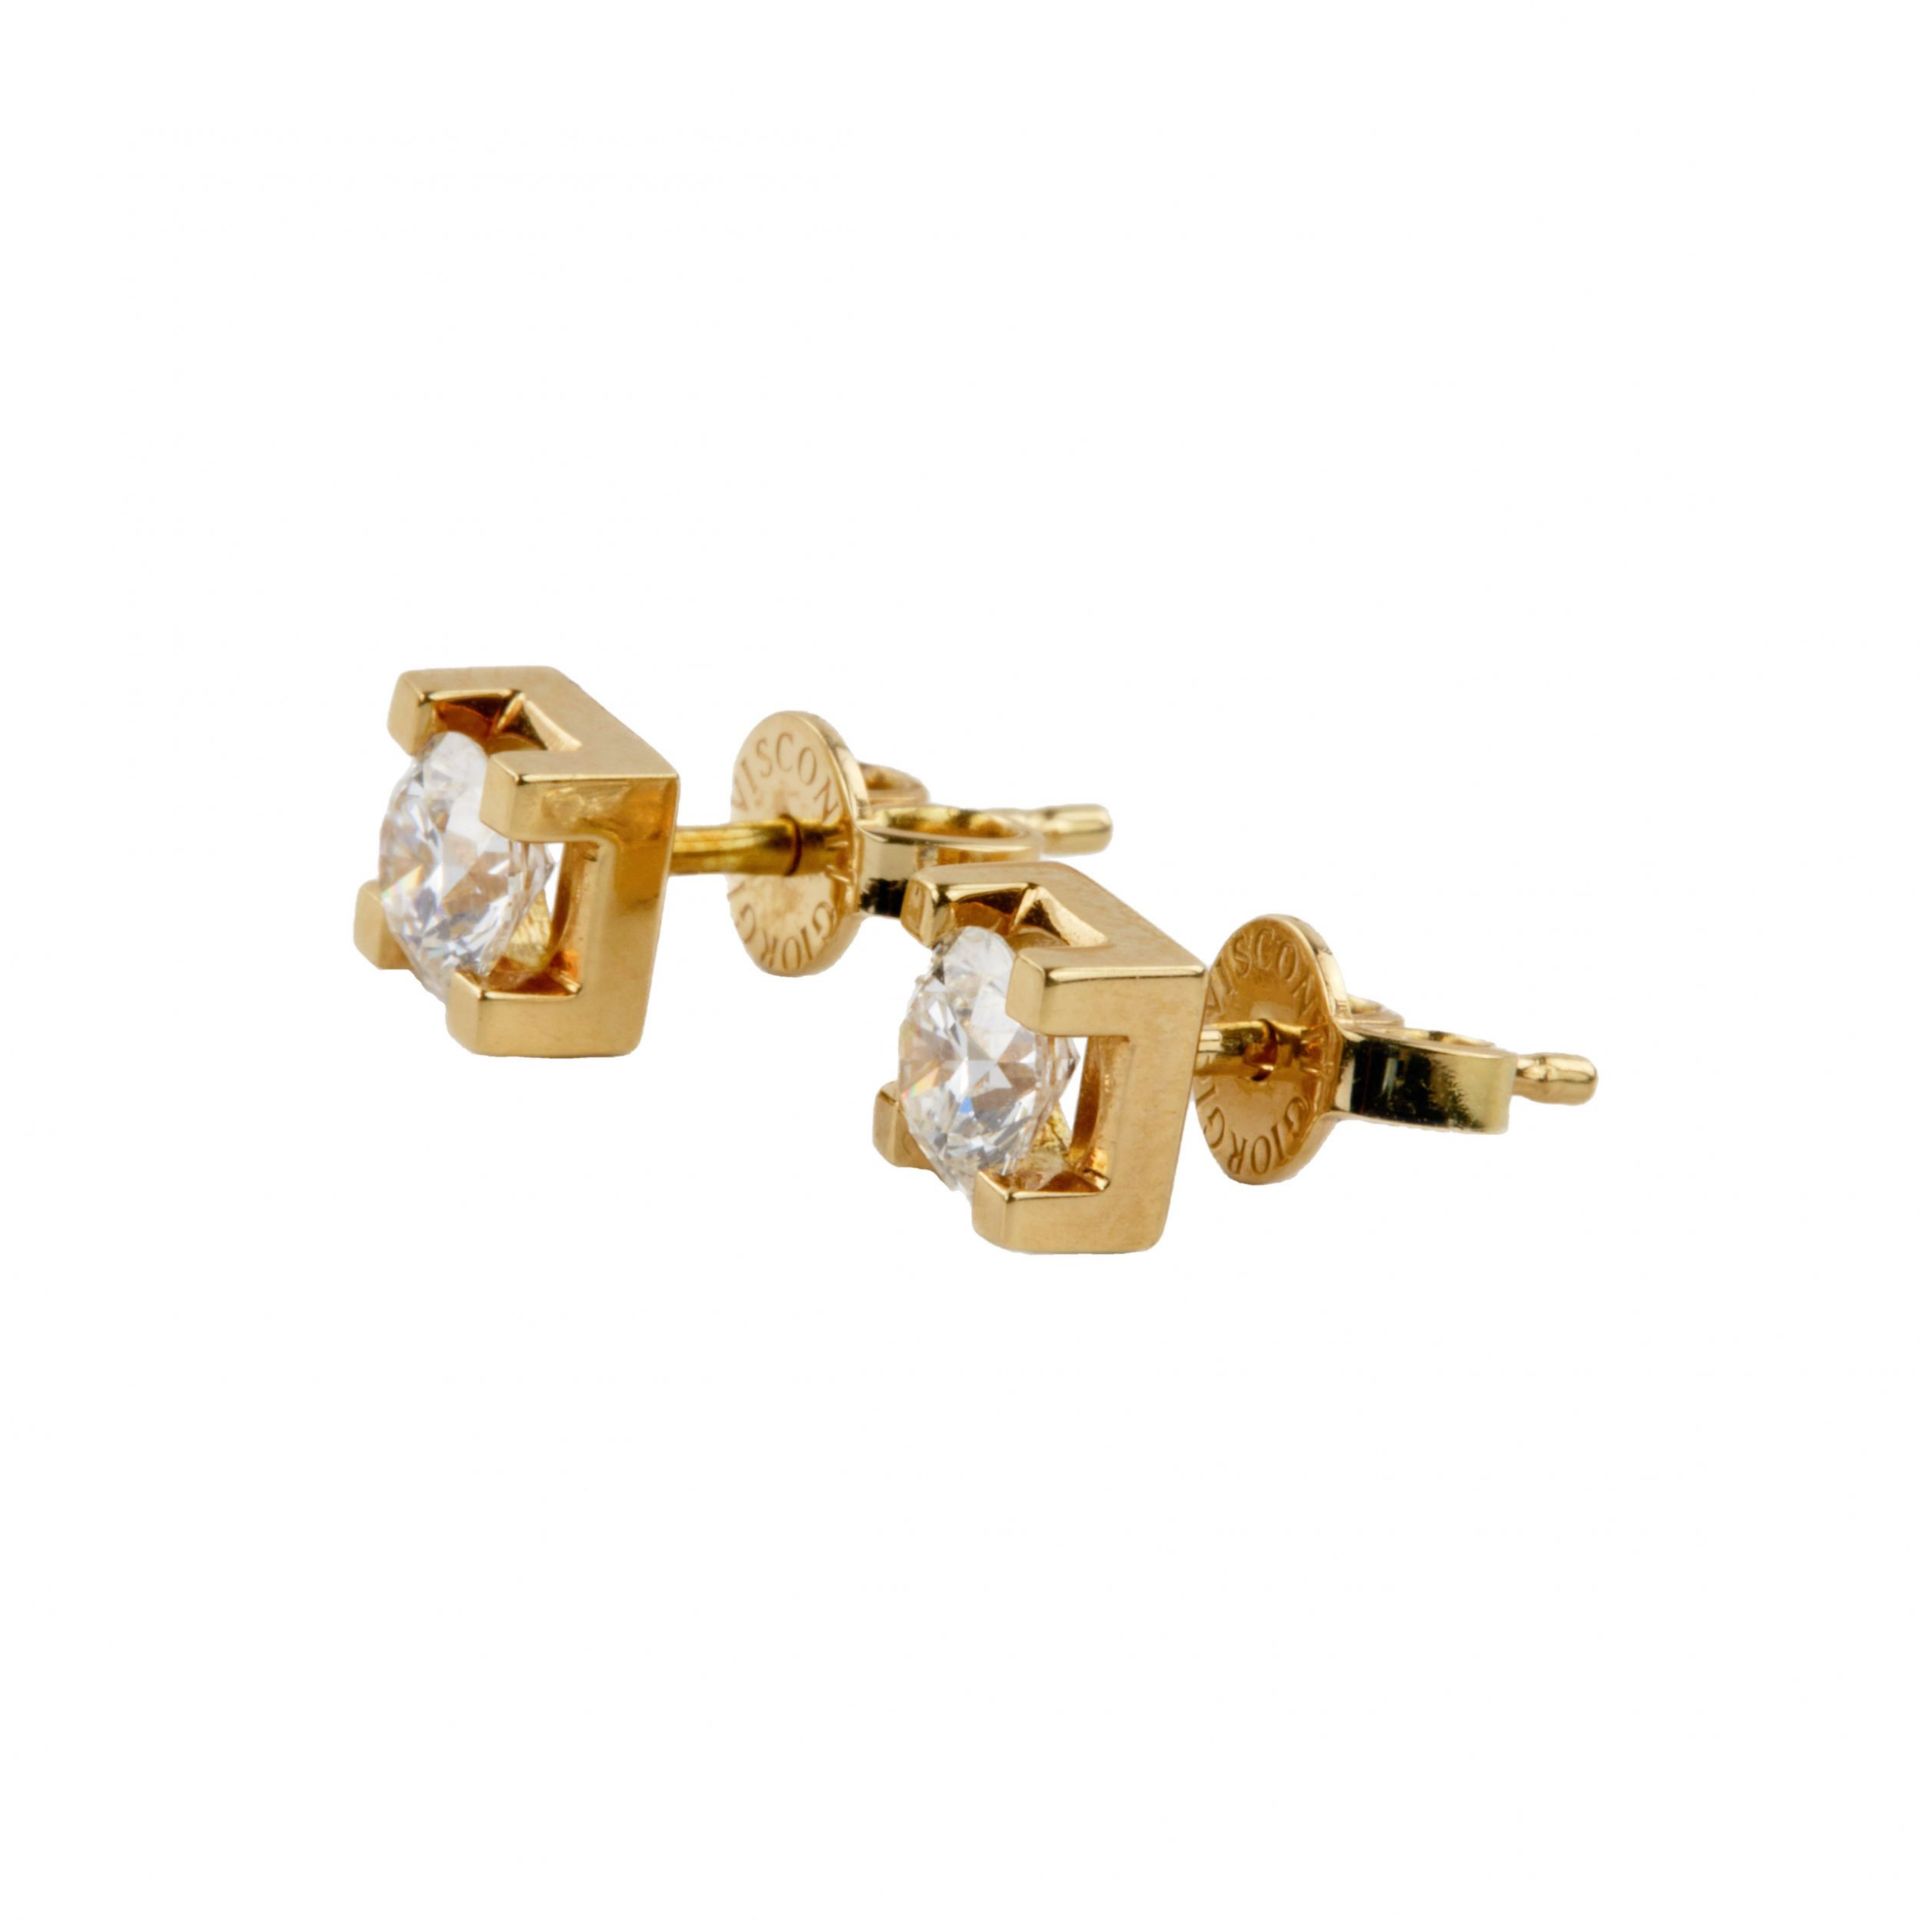 Gold pendant and earrings with diamonds. Giorgio Visconti. - Image 2 of 7